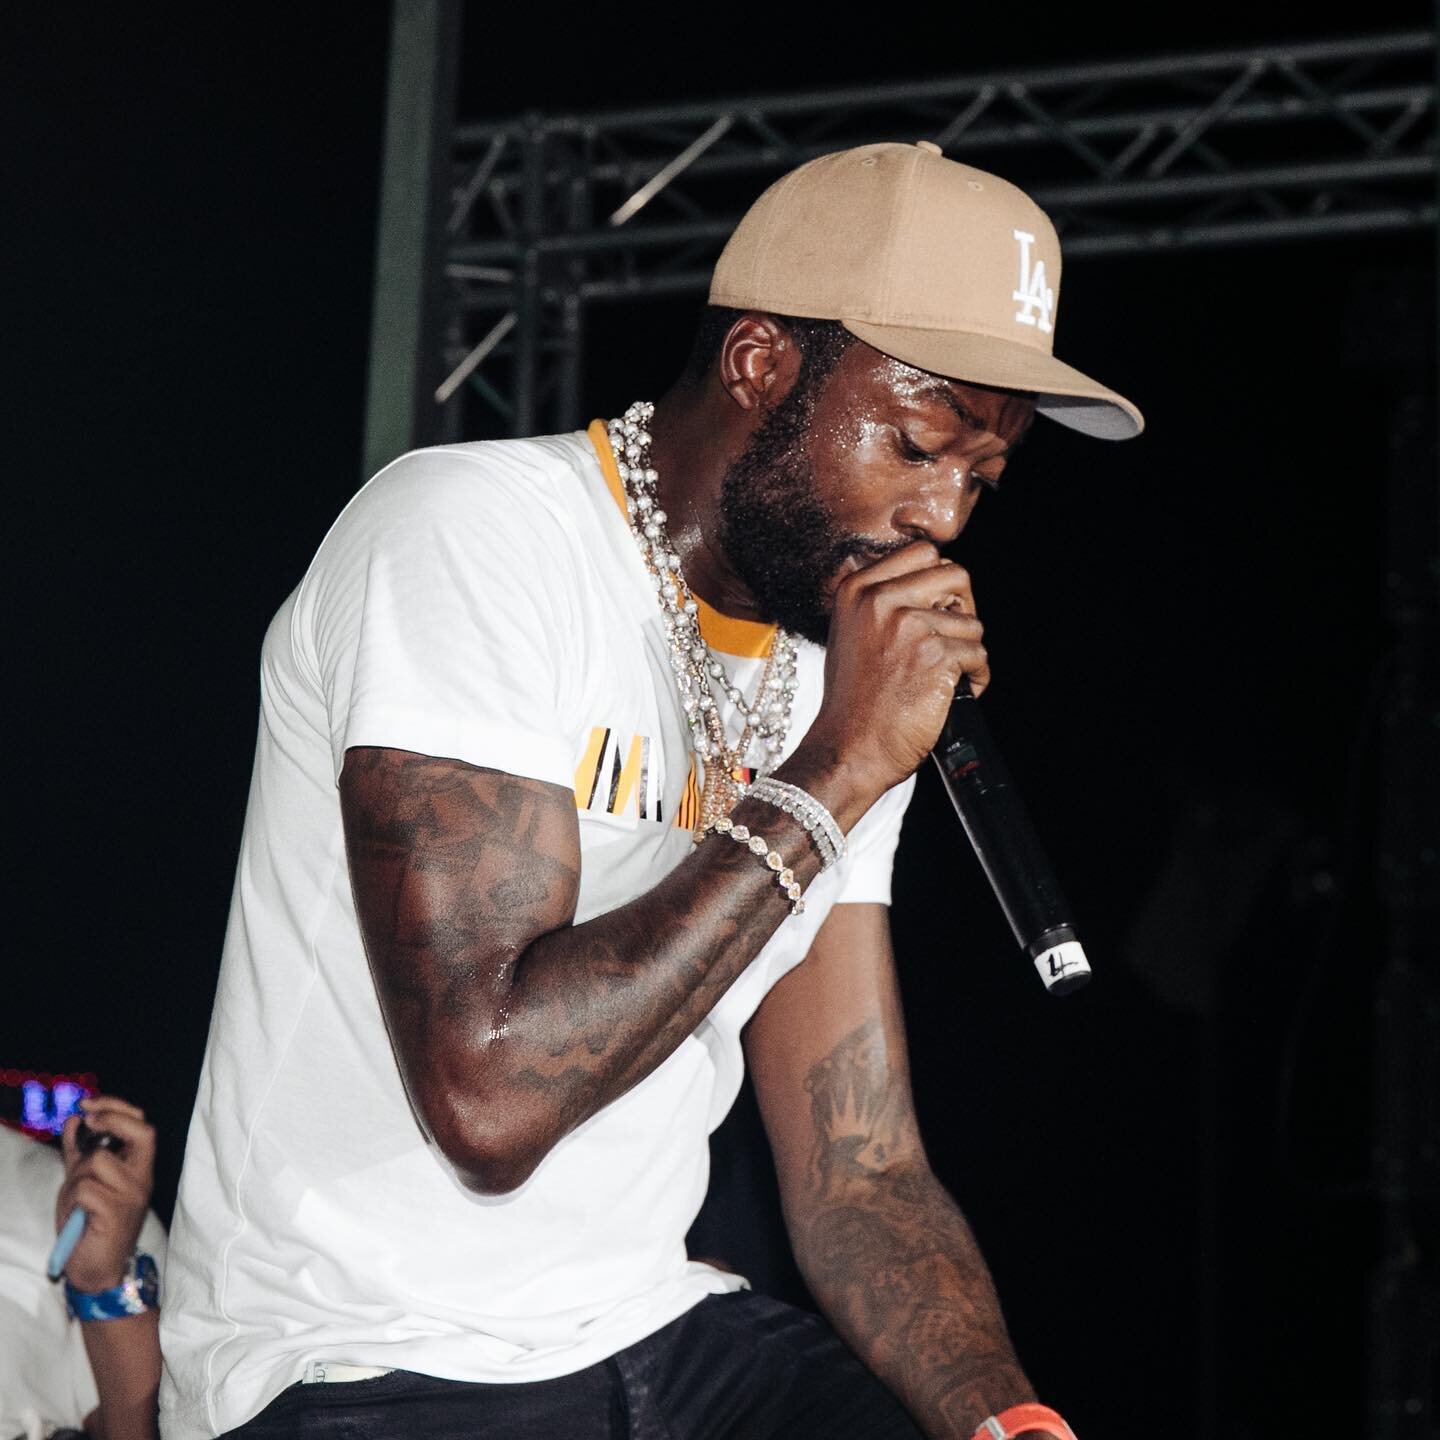 We only throw movies on this side 🗣️🗣️🗣️ 

Meek Mill&rsquo;s performance last July 4th still lives rent free in our minds 😭

@meekmill #thebrooklynboardwalk #coneyisland #daypartny #festival #tbbw #concerts #meekmill #livemusic